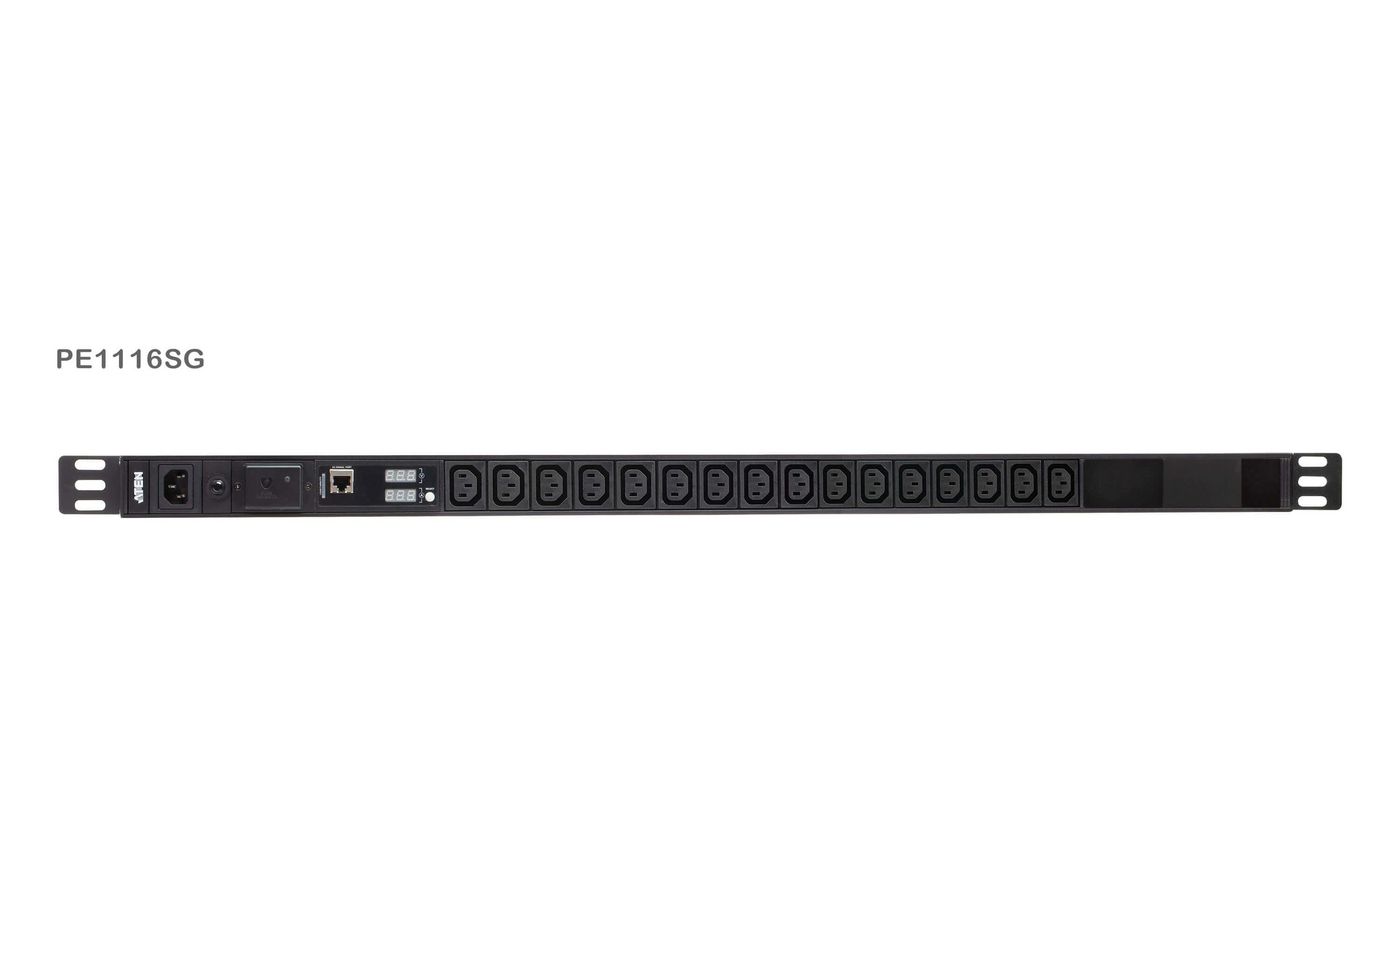 Aten PE1116SG-AT-G W127285134 16-Outlet 0U PDU with Current 